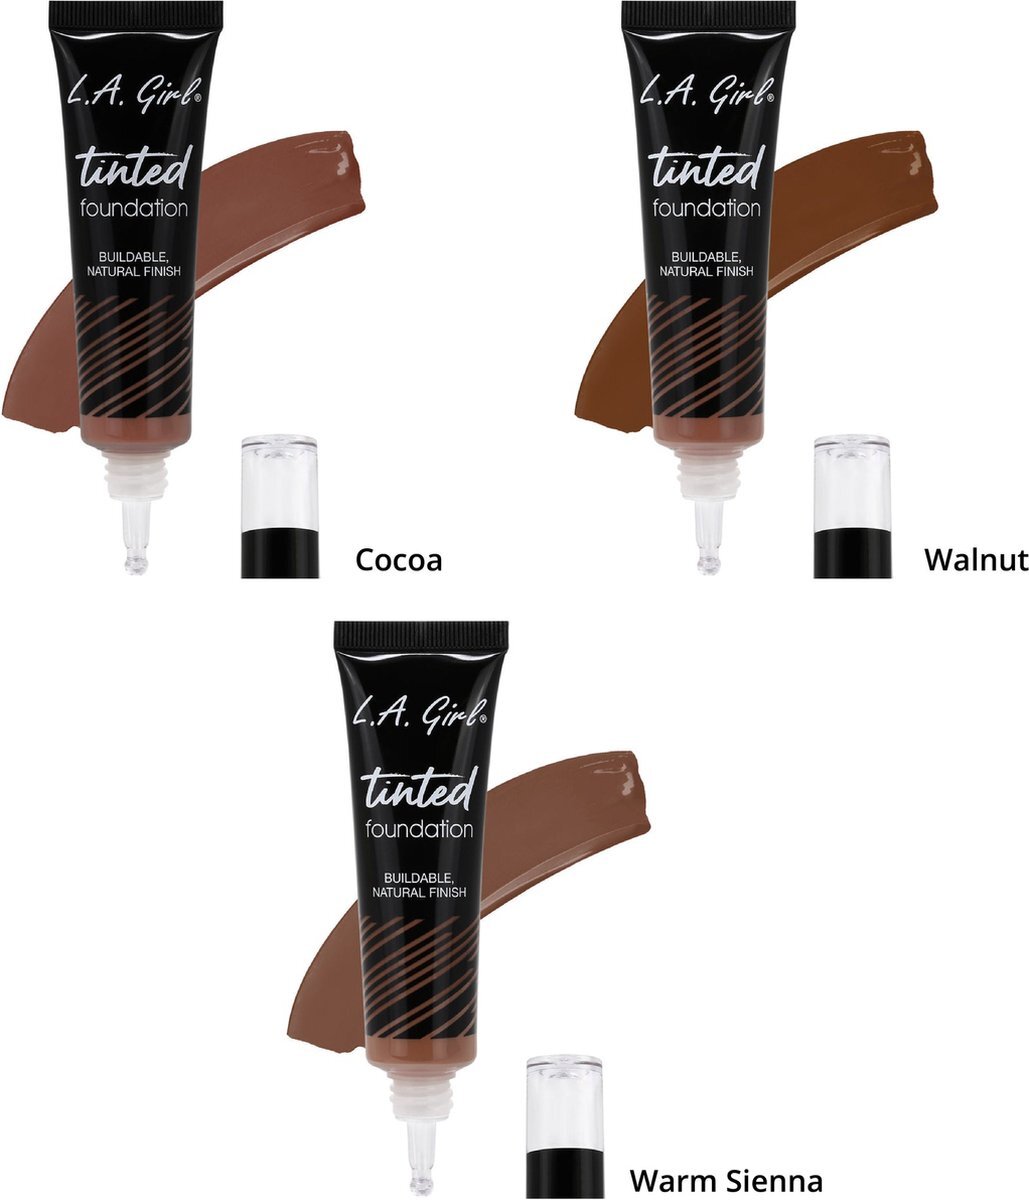 L.A. Girl - Tinted Foundation - Cocoa